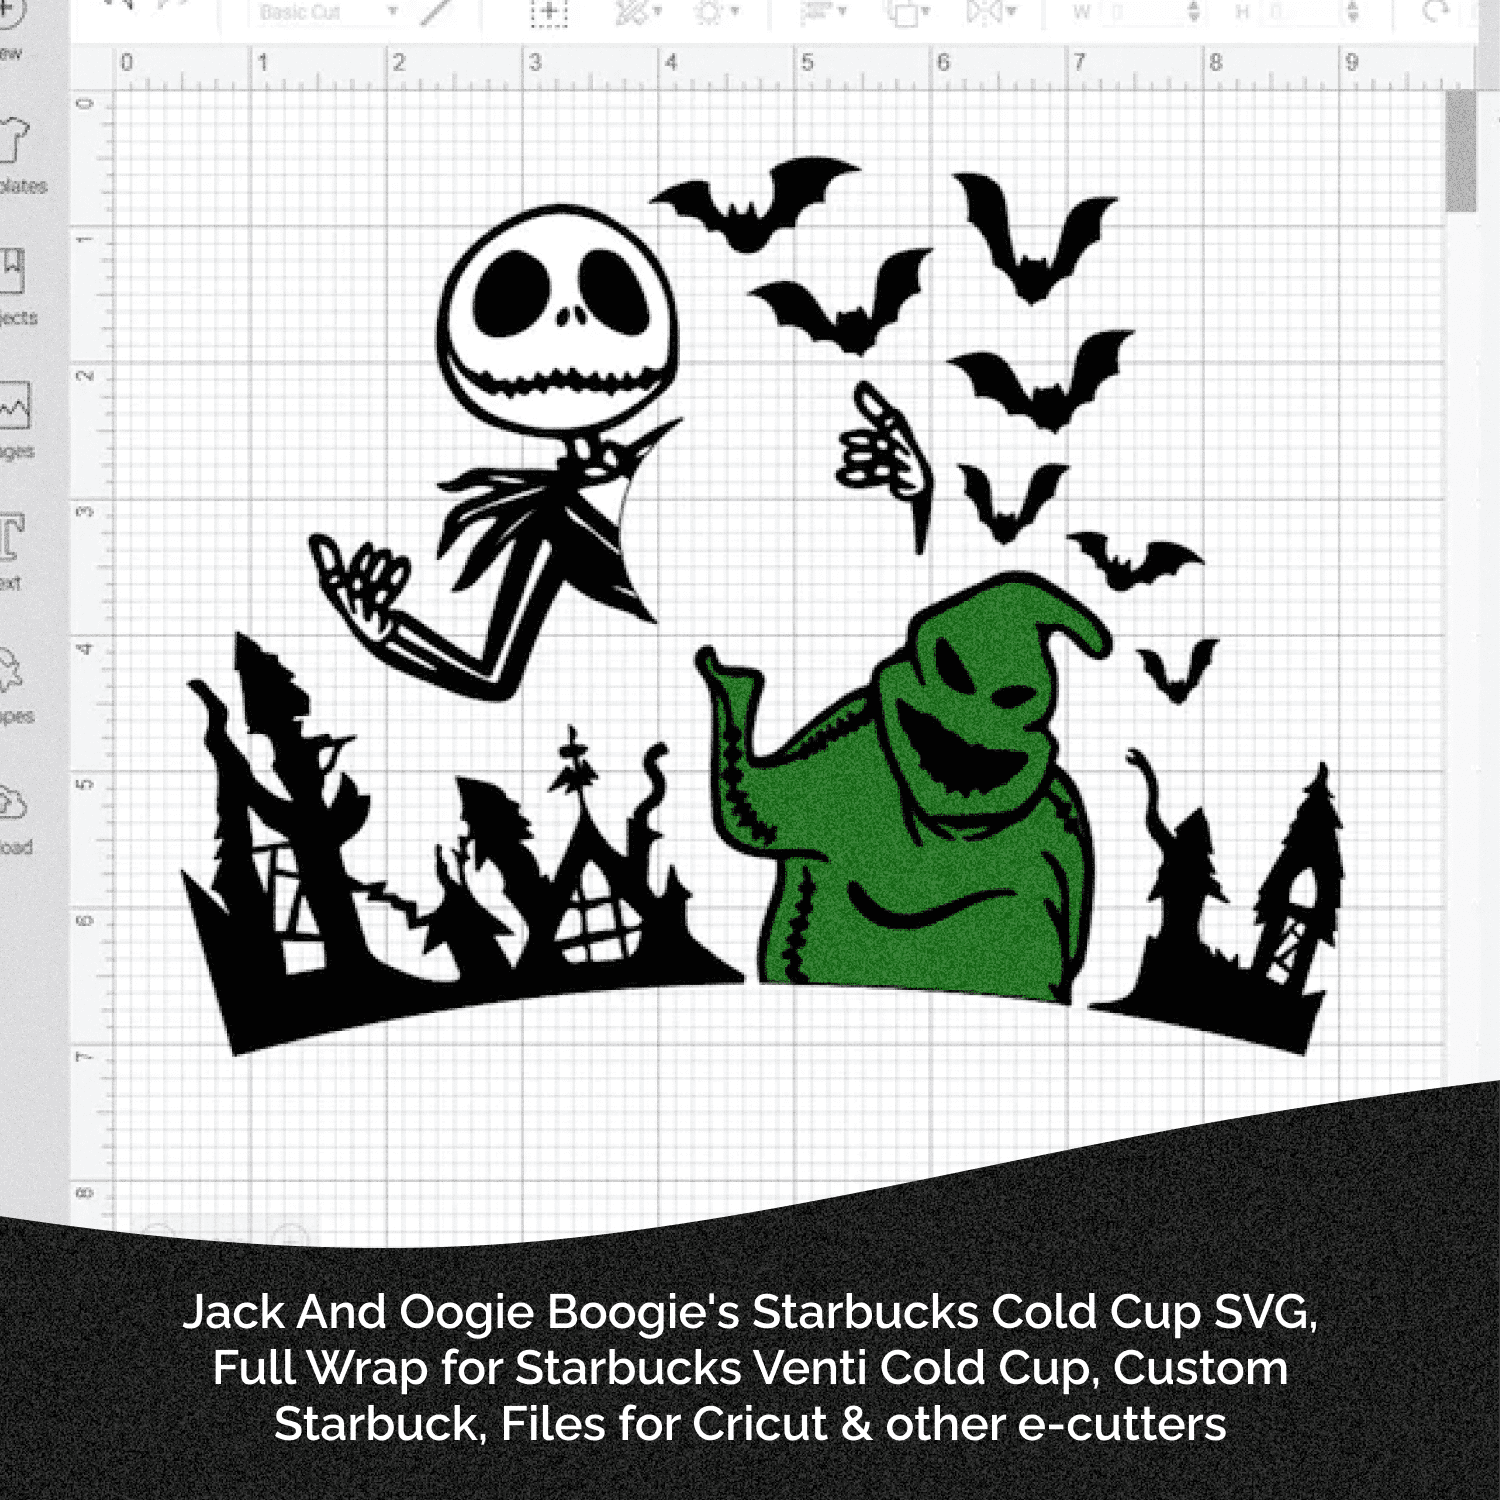 Jack And Oogie Boogie's Starbucks Cold Cup SVG.